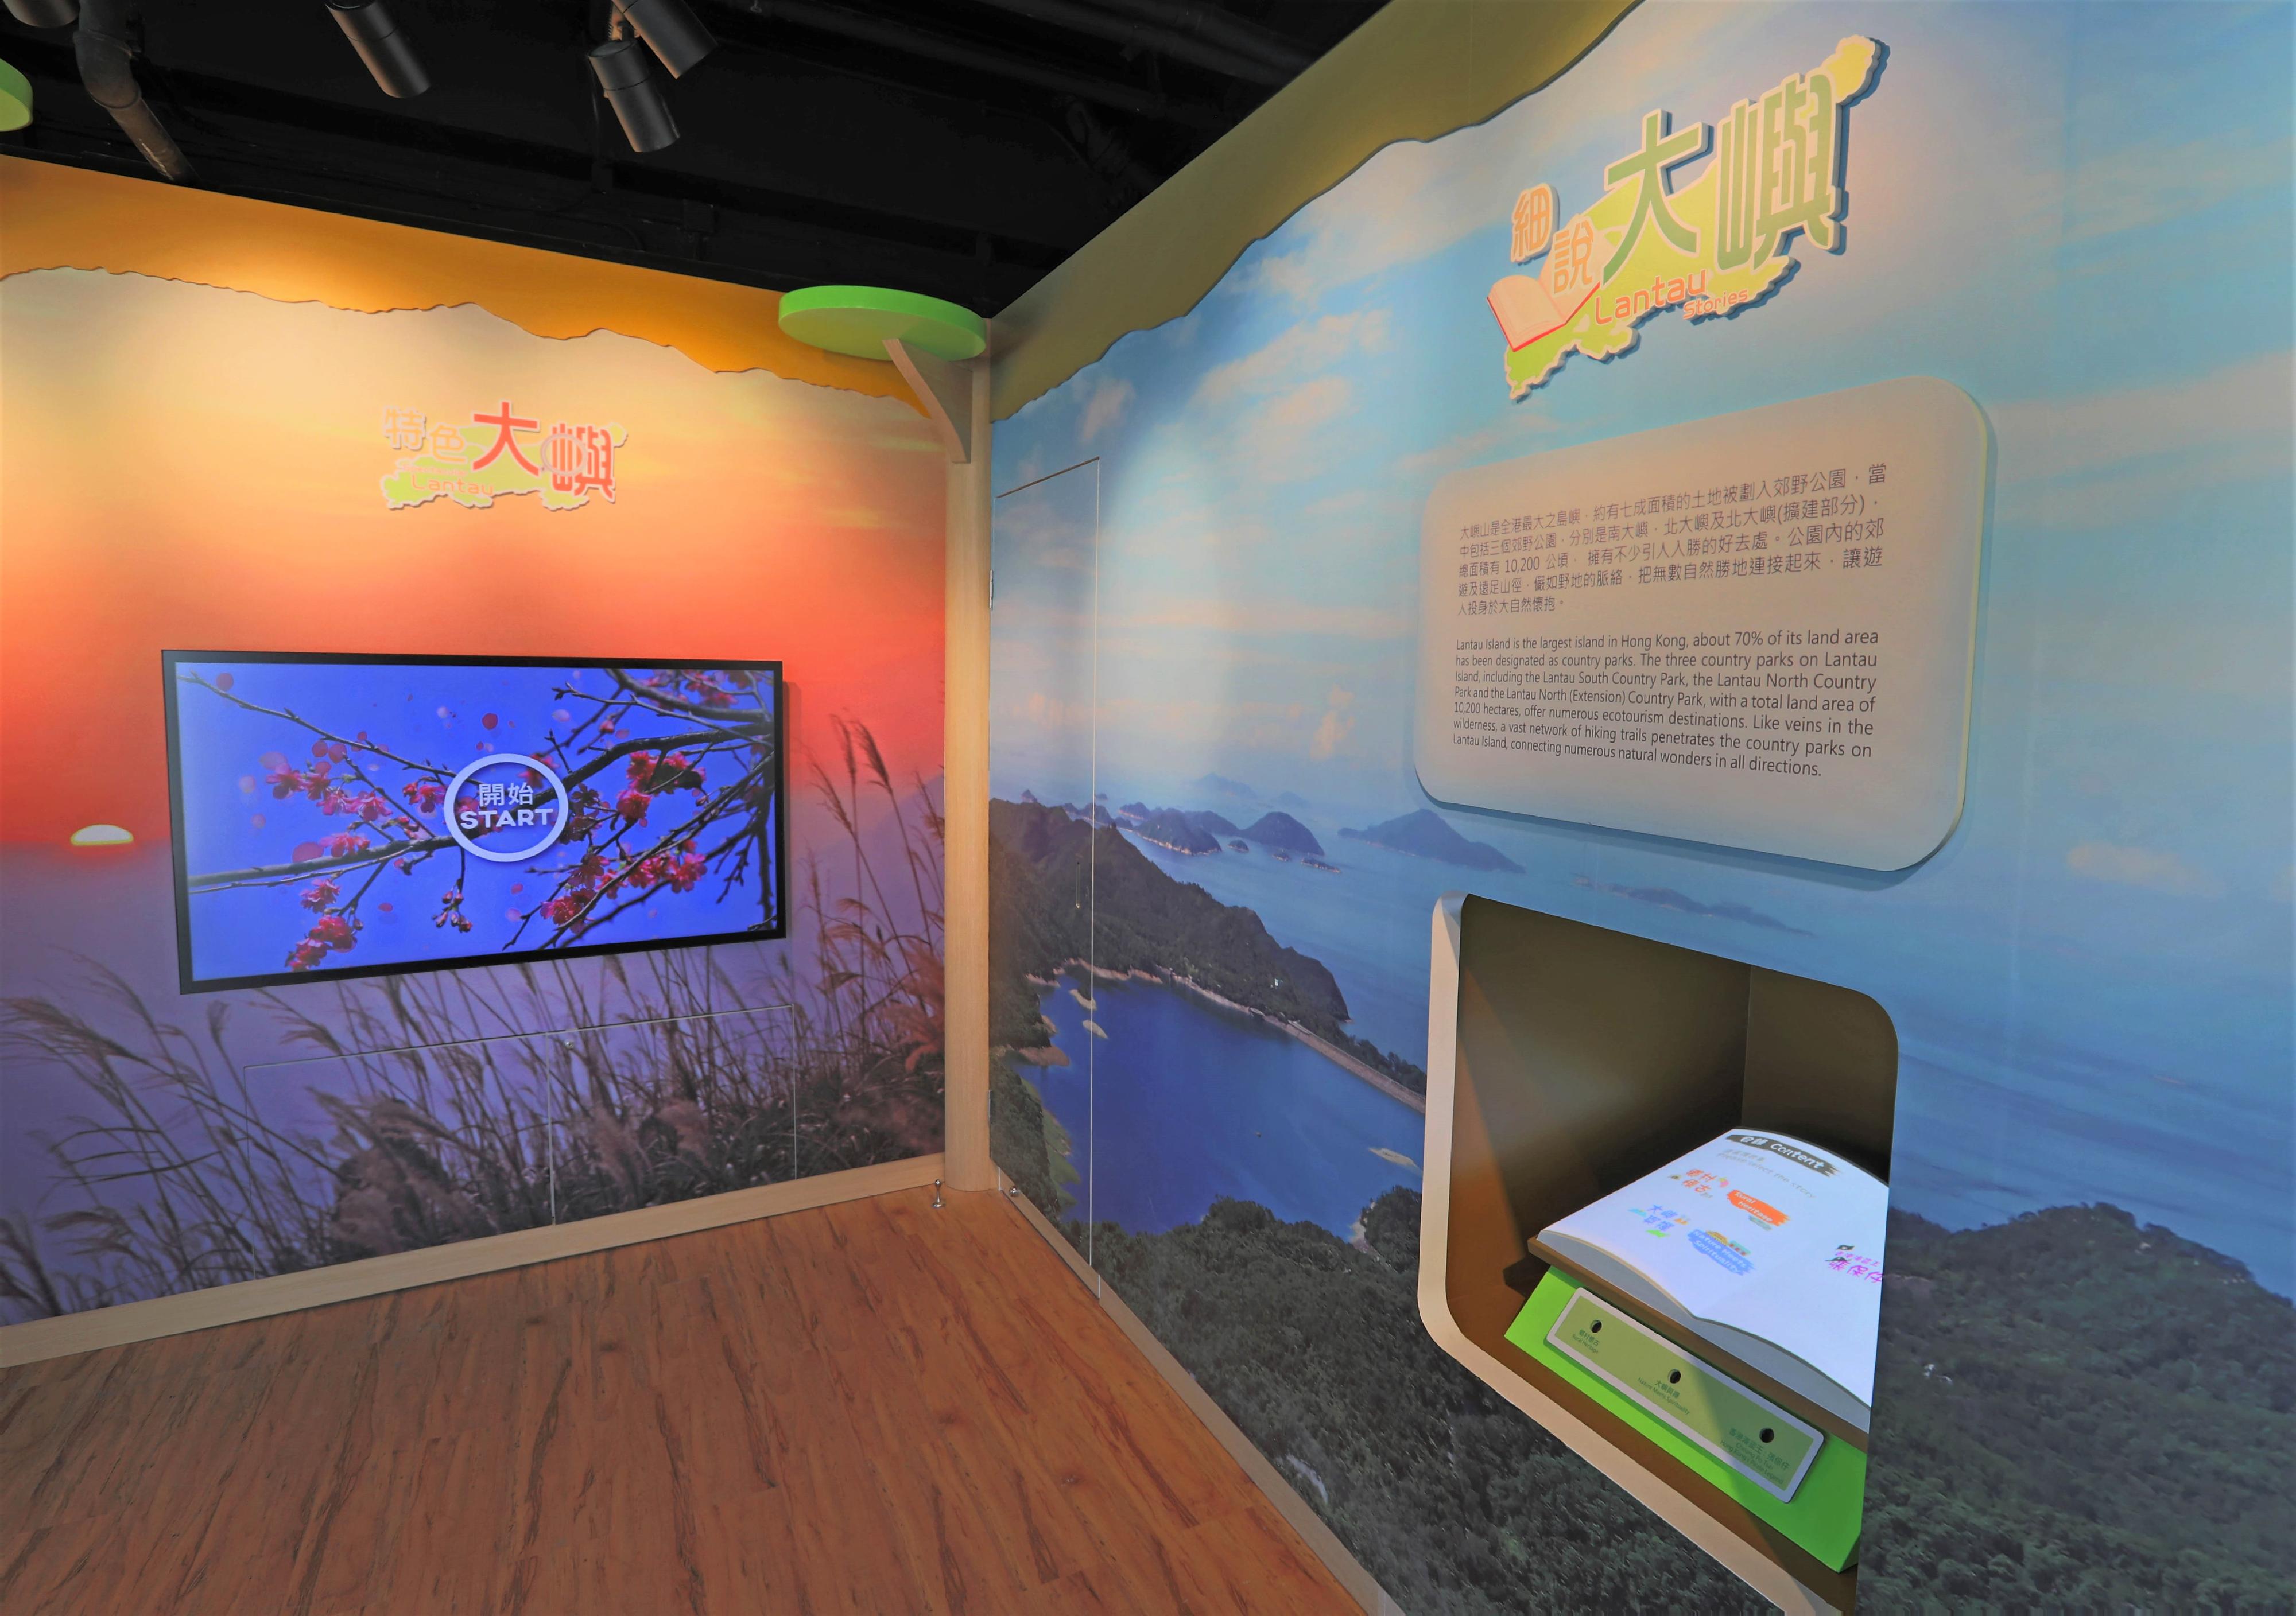 With the completion of renovation works, the Ngong Ping Nature Centre at Ngong Ping Village on Lantau Island reopened today (November 30). The Centre houses three interactive exhibits that present the diverse treasures of Lantau Island to visitors, and promote environmental protection and ecological conservation. Photo shows some of the exhibits, including the 3D projection storybook "Lantau Stories" (right) and the interactive game corner "Spectacular Lantau" (left).